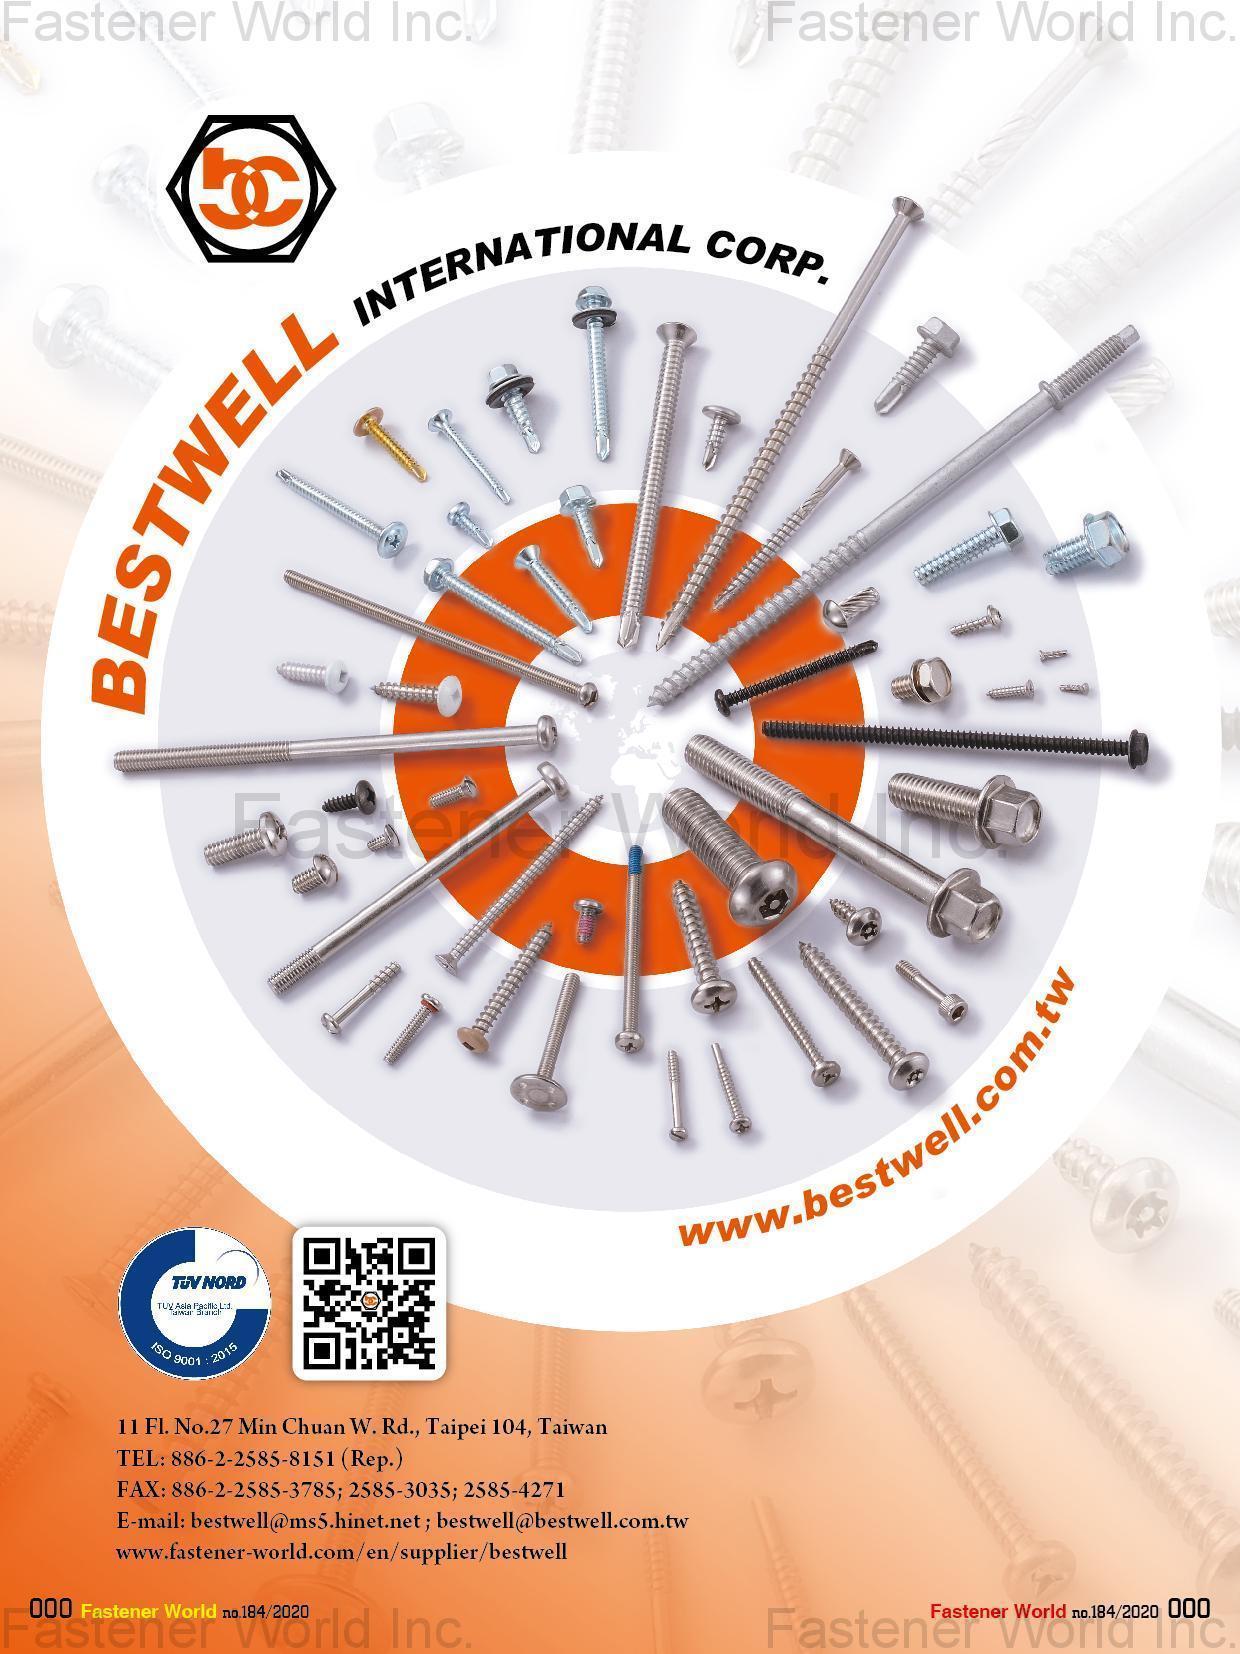 BESTWELL INTERNATIONAL CORP.  , Chipboard ScrewsHEX BOLT, SQUARE BOLT, CARRIAGE BOLT, FLANGE BOLT, SOCKET HEAD CAP SCREW, SET SCREW, SHACKLE BOLT, CUP BOLT, ALL THREAD STUD, OVAL NECK, SQUARE NECK, GAS BOLT, T-HEAD BOLT, SINGLE END STUD, T/S & M/S, SELF DRILLING SCREW, DWS & CHIPBOARD SCREW, SCREW WITH BONDER WASHER, SECURITY SCREW, SEM SCREW, SEPCIAL SERRATION SCREW, NUT, LOCK NUT, TEFLON COATING NUT, NON-STANDARD & OTHERS, FLAT WASHER, LOCK WASHER, SQUARE WASHER, SOLID WASHER, ANCHOR, STAMPING, SPECIAL FASTENERS, D-RING & RINGS, CNC ITEMS, WIRE MESH, BUTT SEAM SPACER, PLASTIC OR RUBBER PARTS, POWDER METALLURGY, SPRING & CL